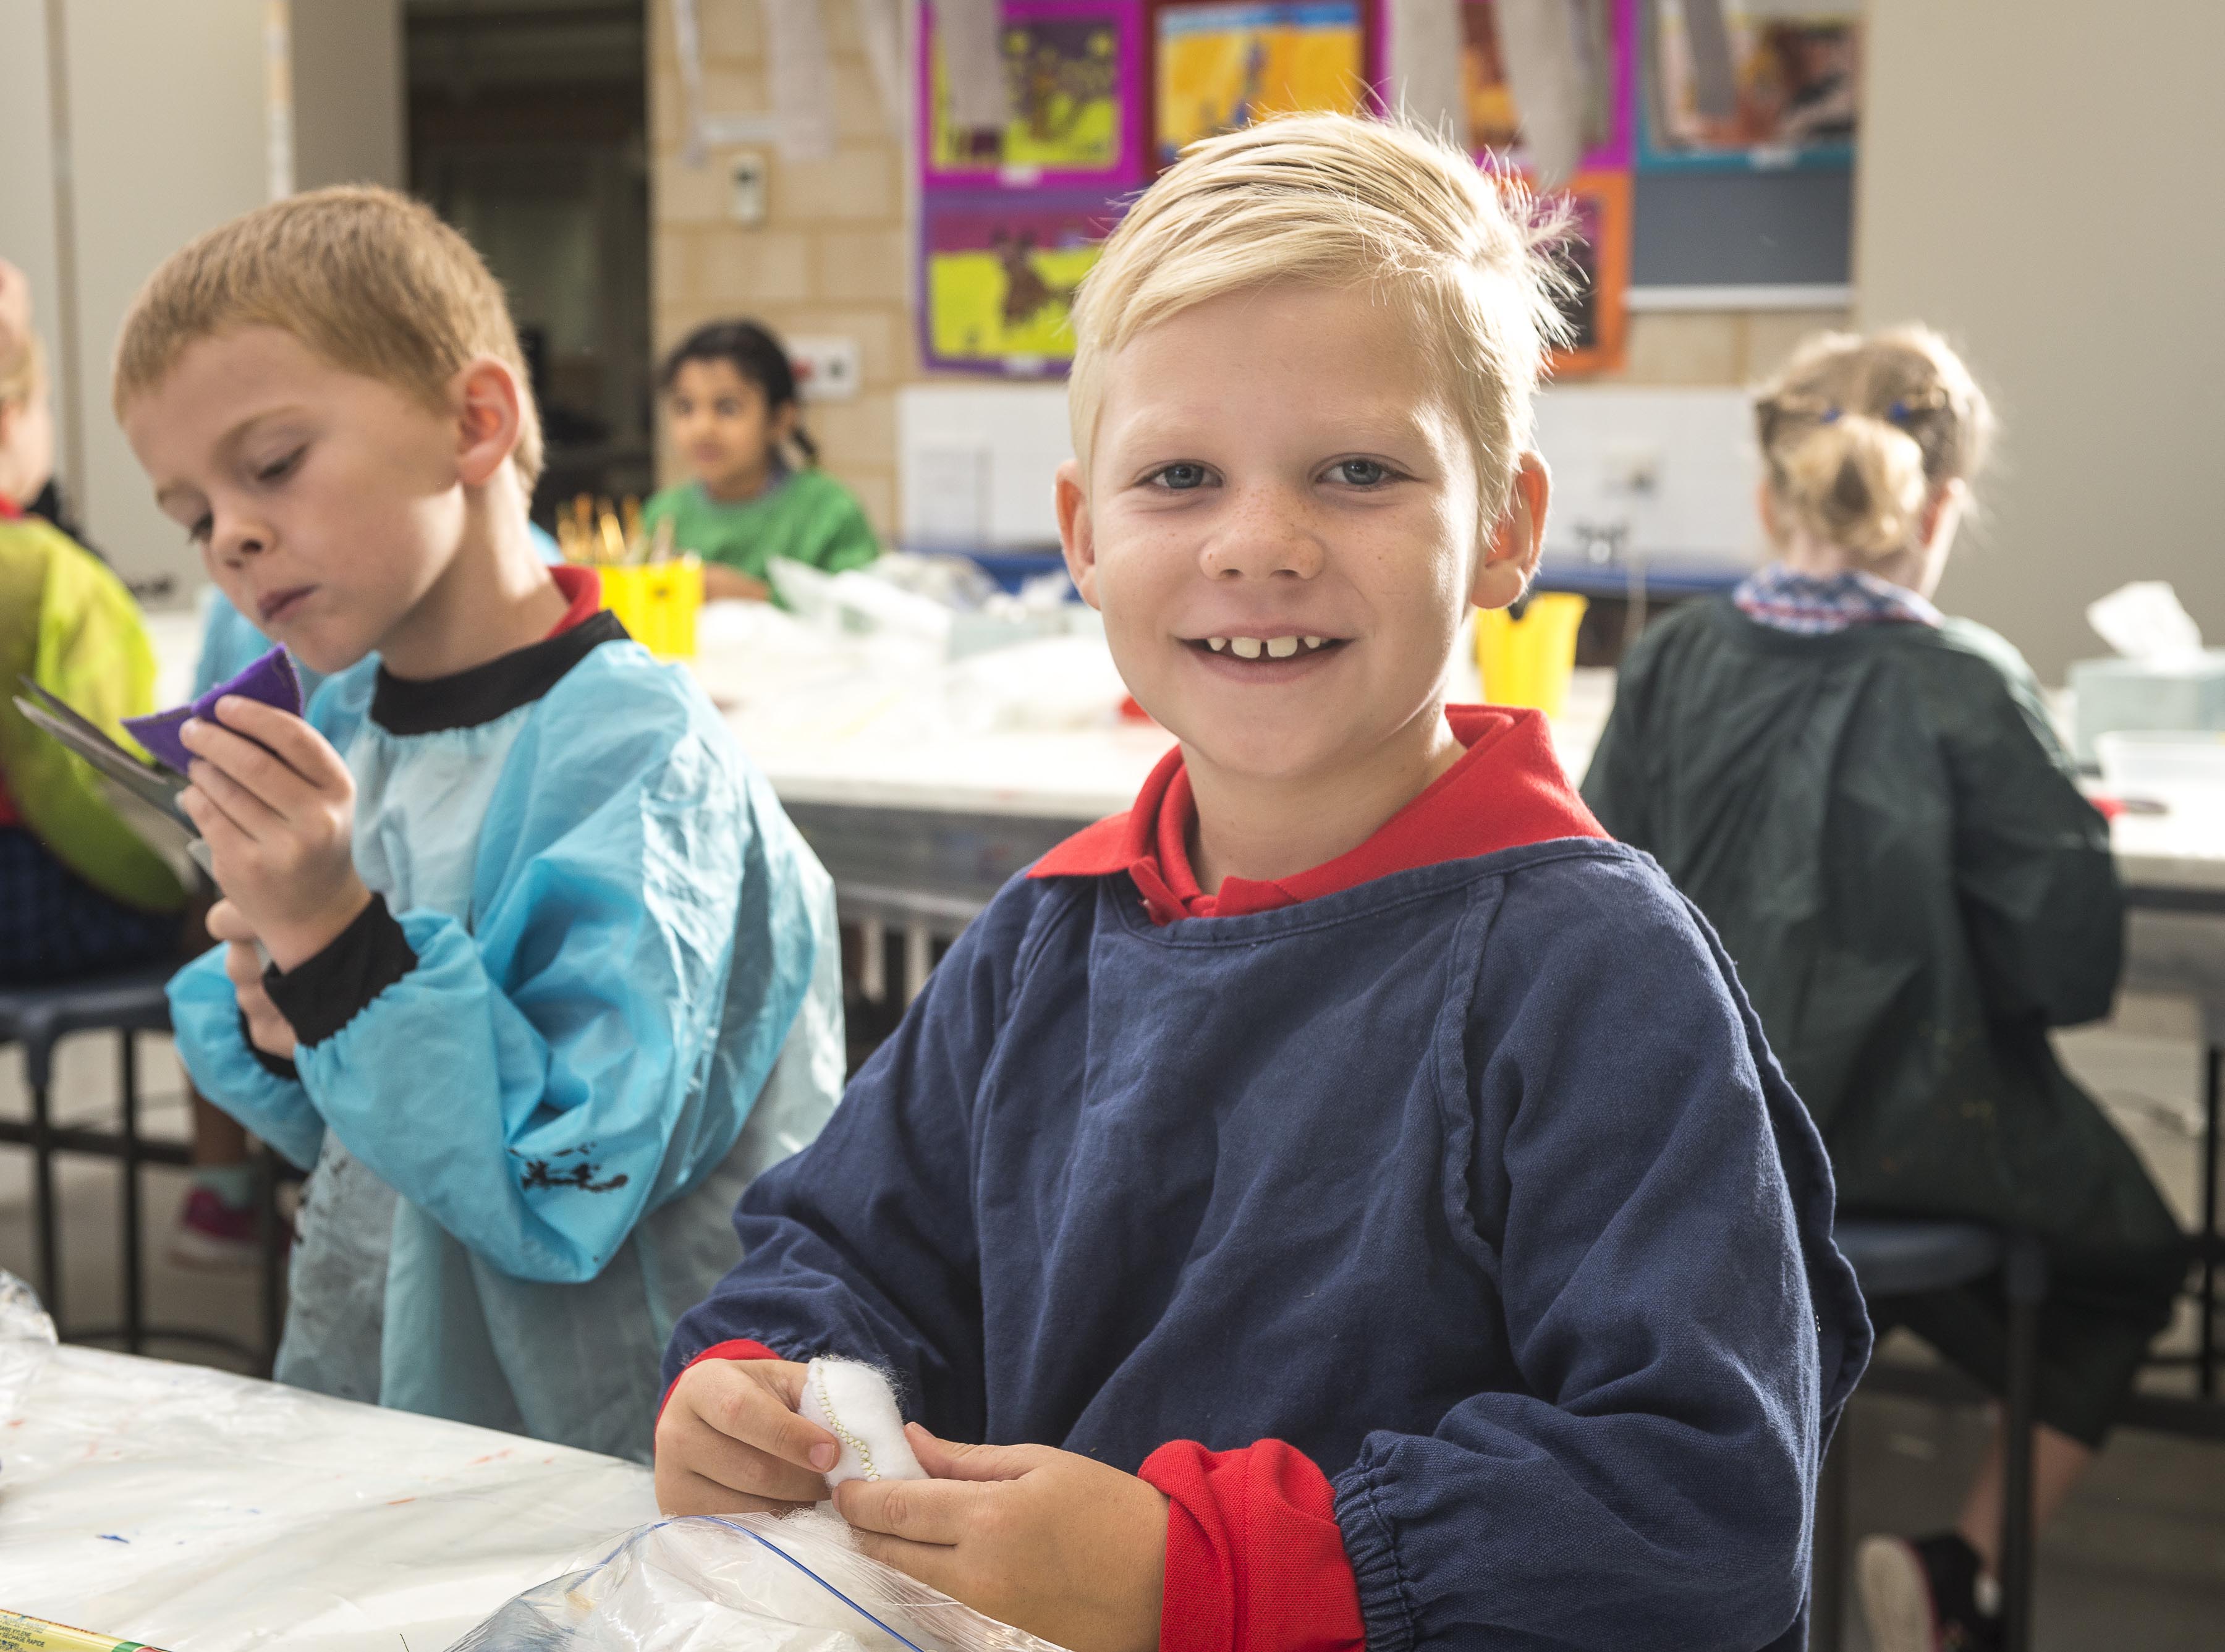 Art classes at Cottesloe Primary School